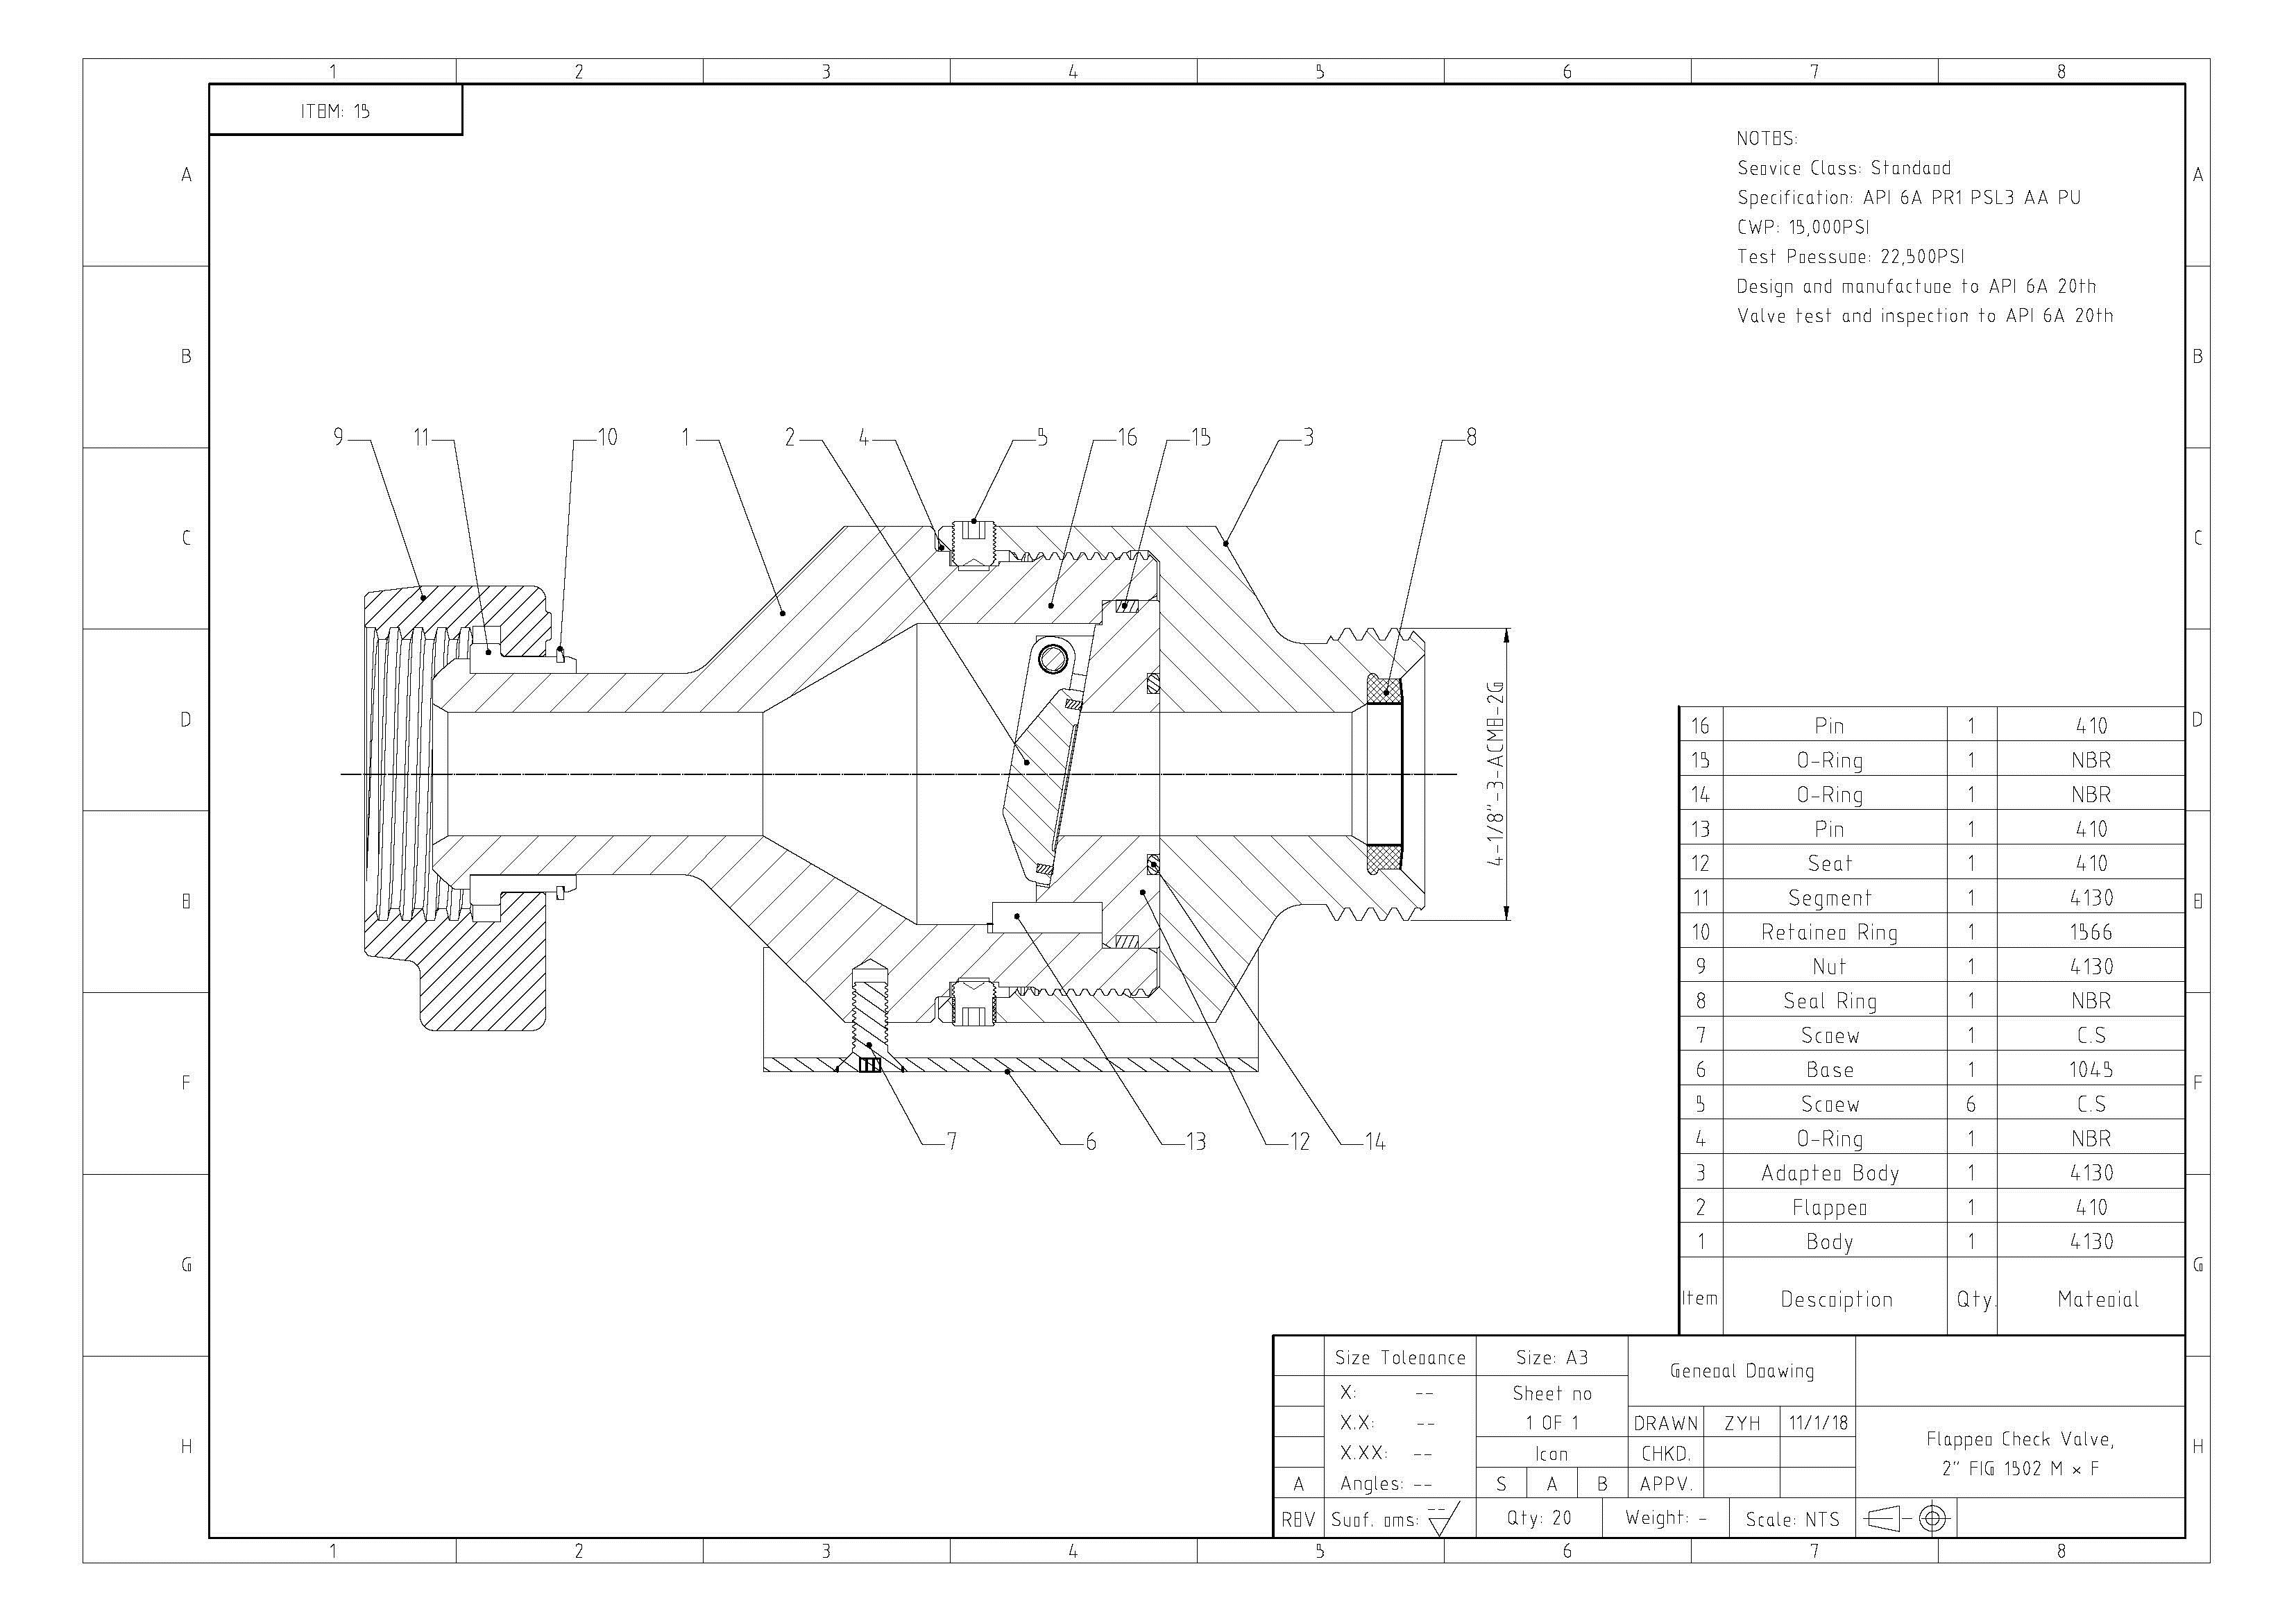 Flapper Check Valve Drawing